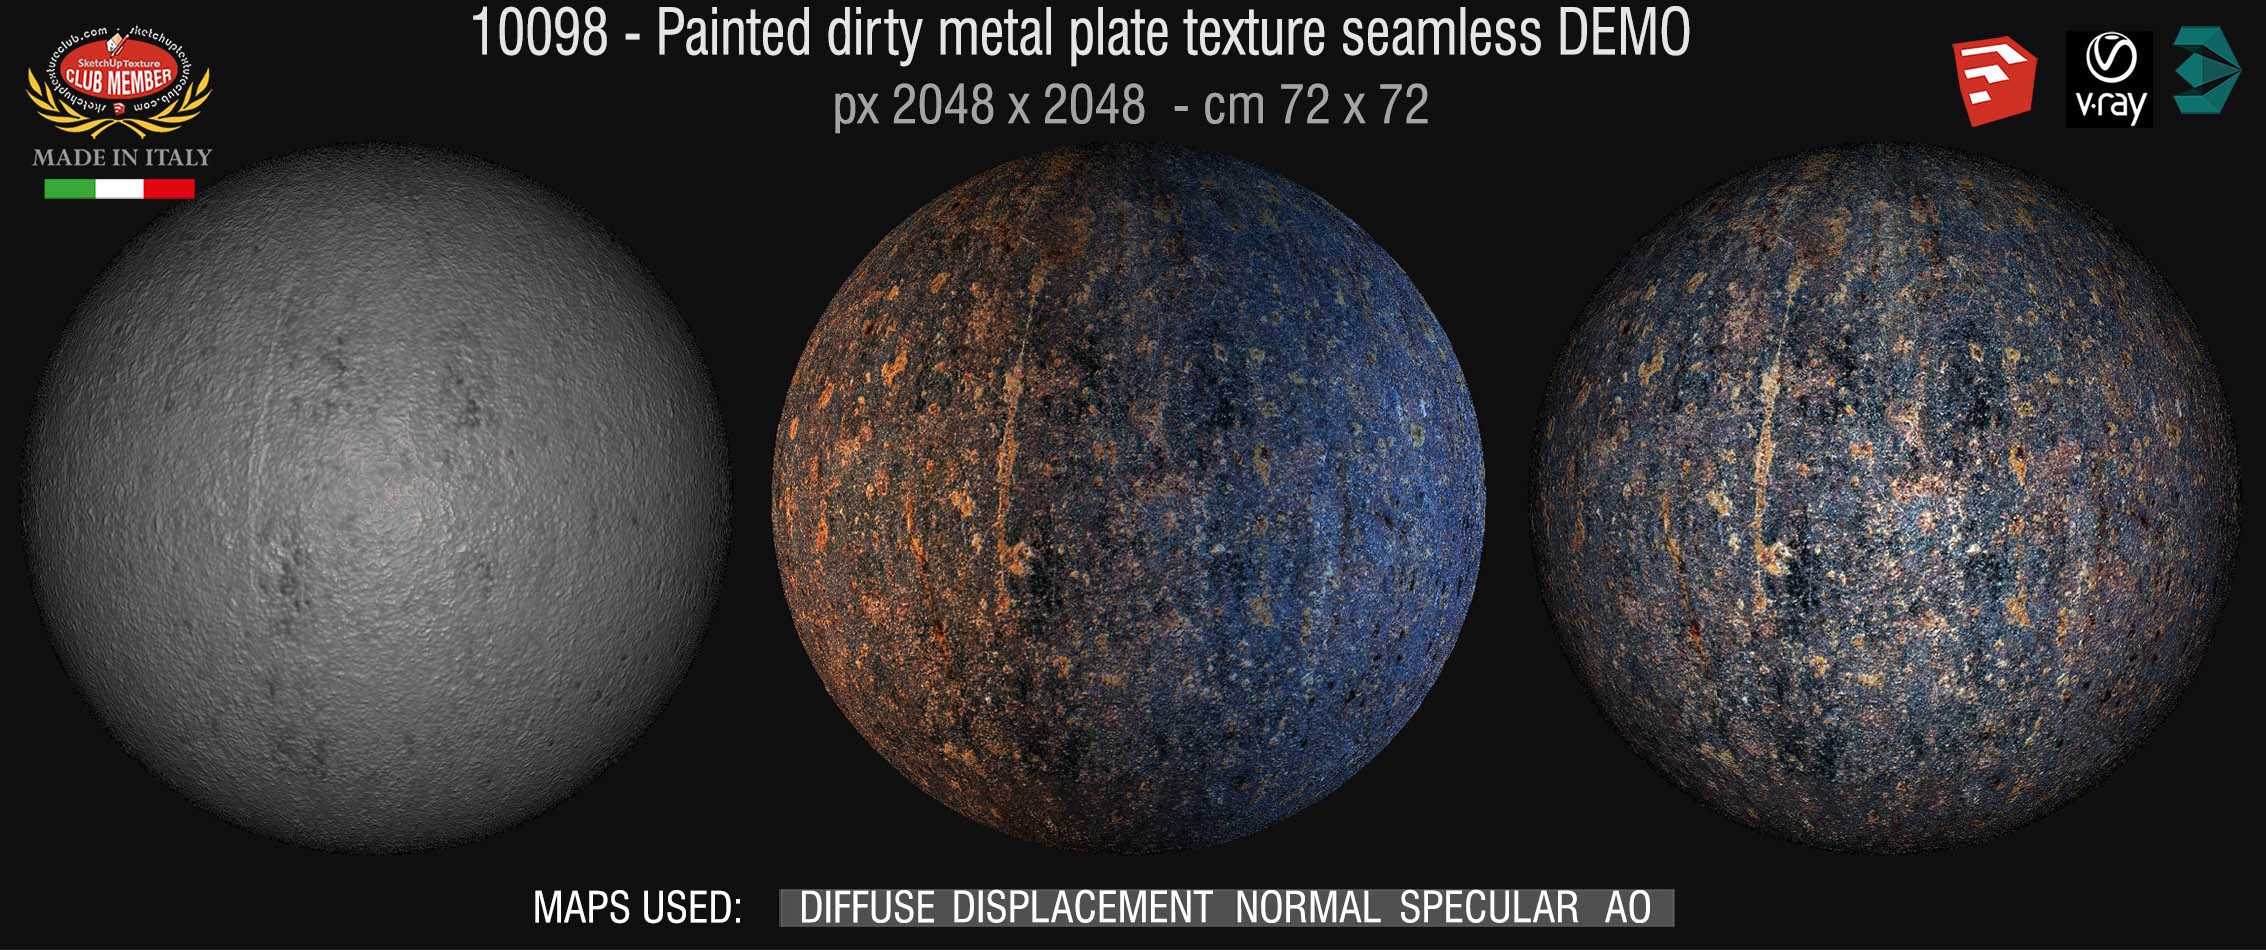 10098 HR Painted dirty metal texture seamless + maps DEMO